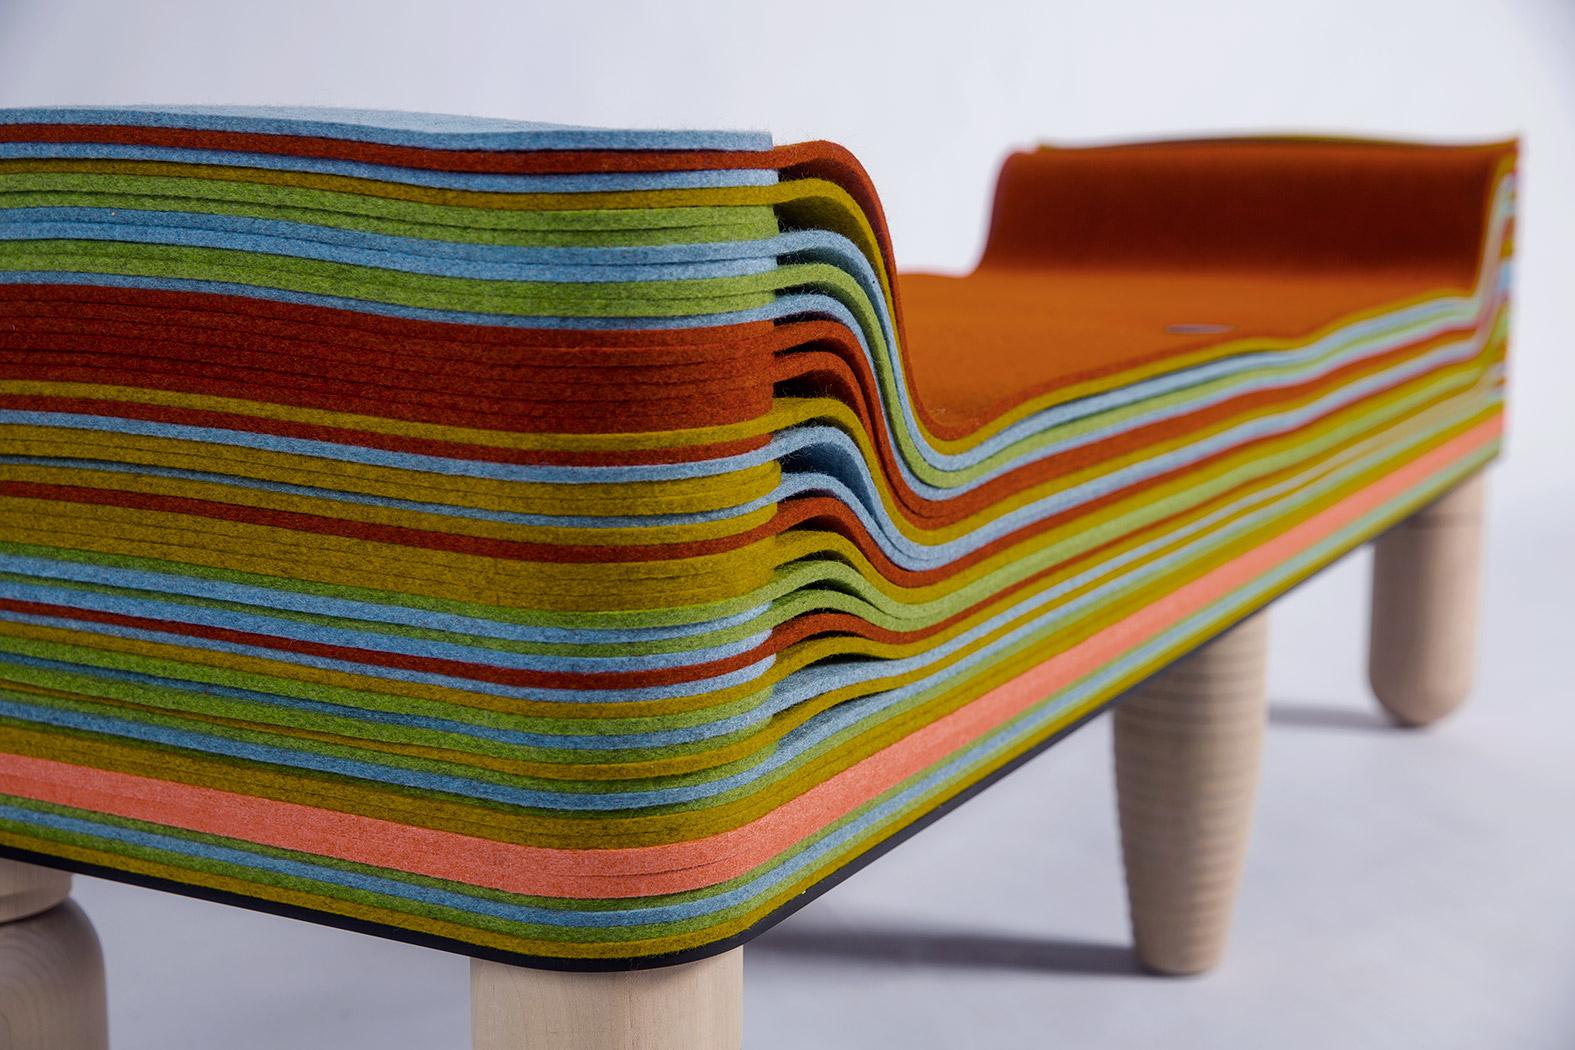 Maxine B, Felt and Wood Bench, Benoist F. Drut in STACKABL, Canada, 2021 For Sale 6